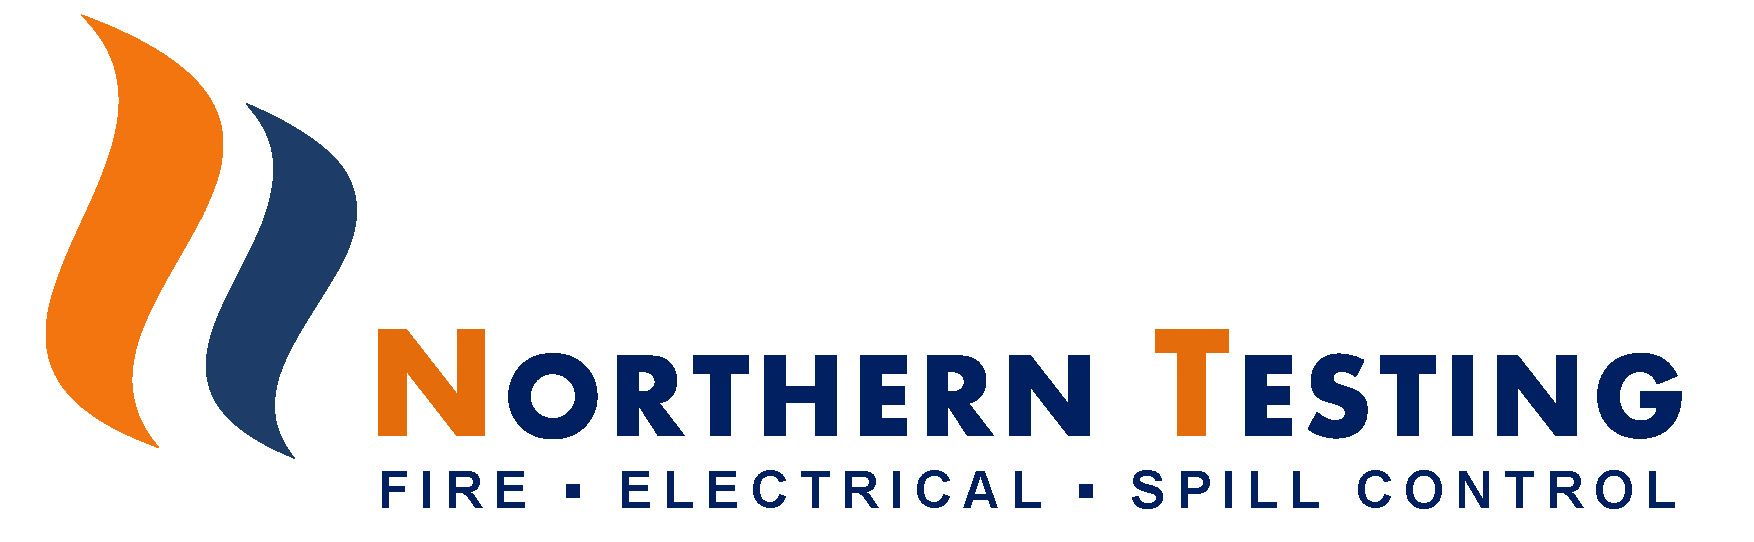 Northern Testing: Professional Electrical & Fire Safety in the Northern Territory